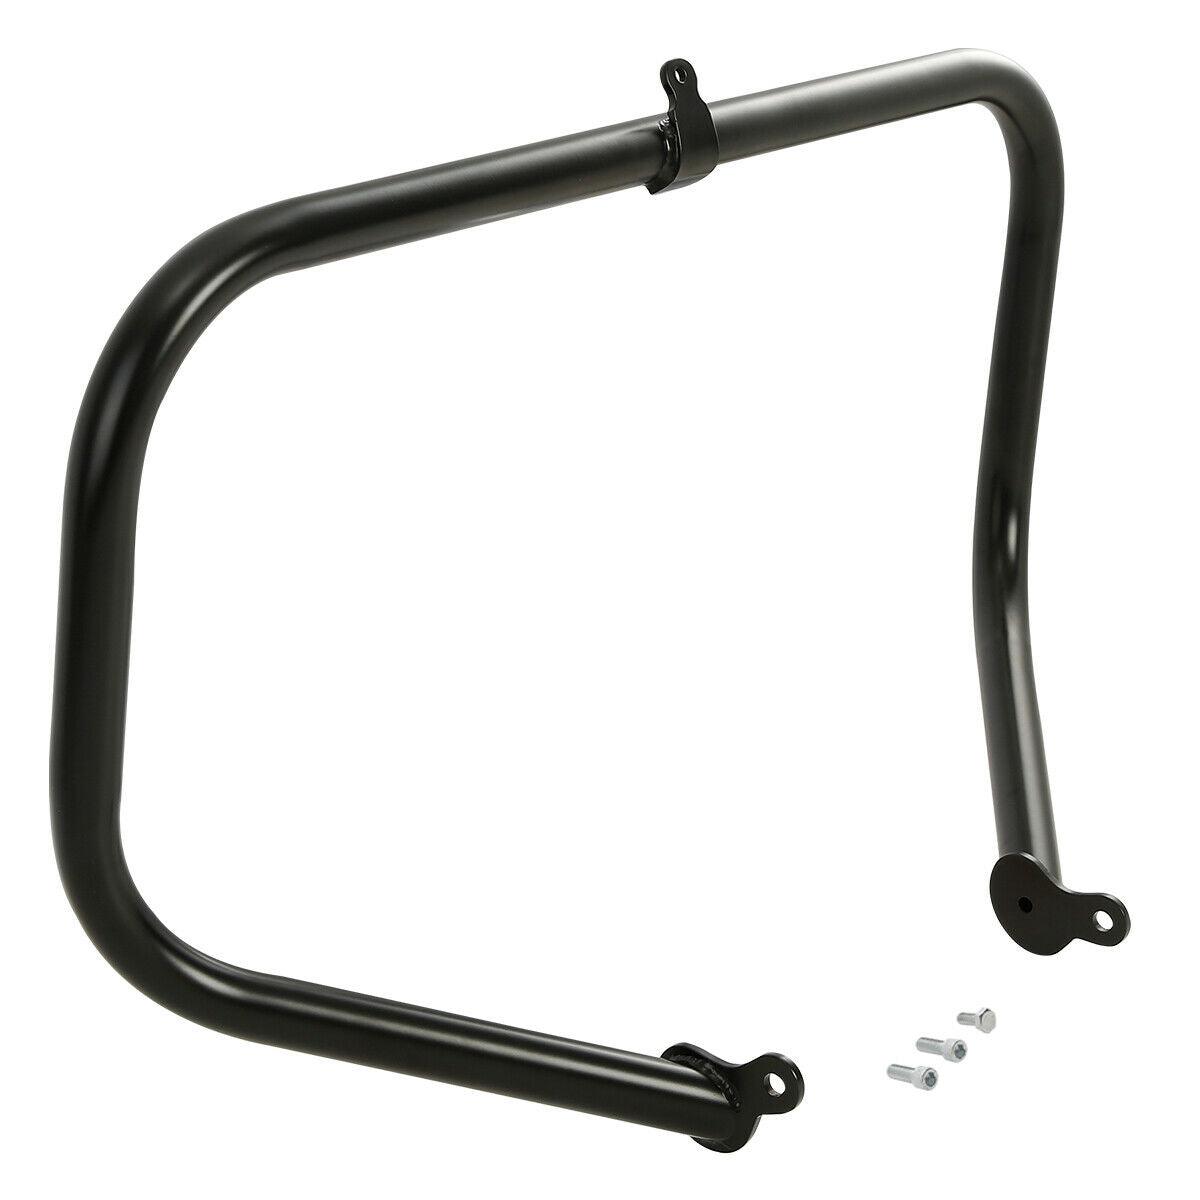 1 1/4" Highway Engine Guard Crash Bar Fit For Harley Touring Street Glide 09-Up - Moto Life Products